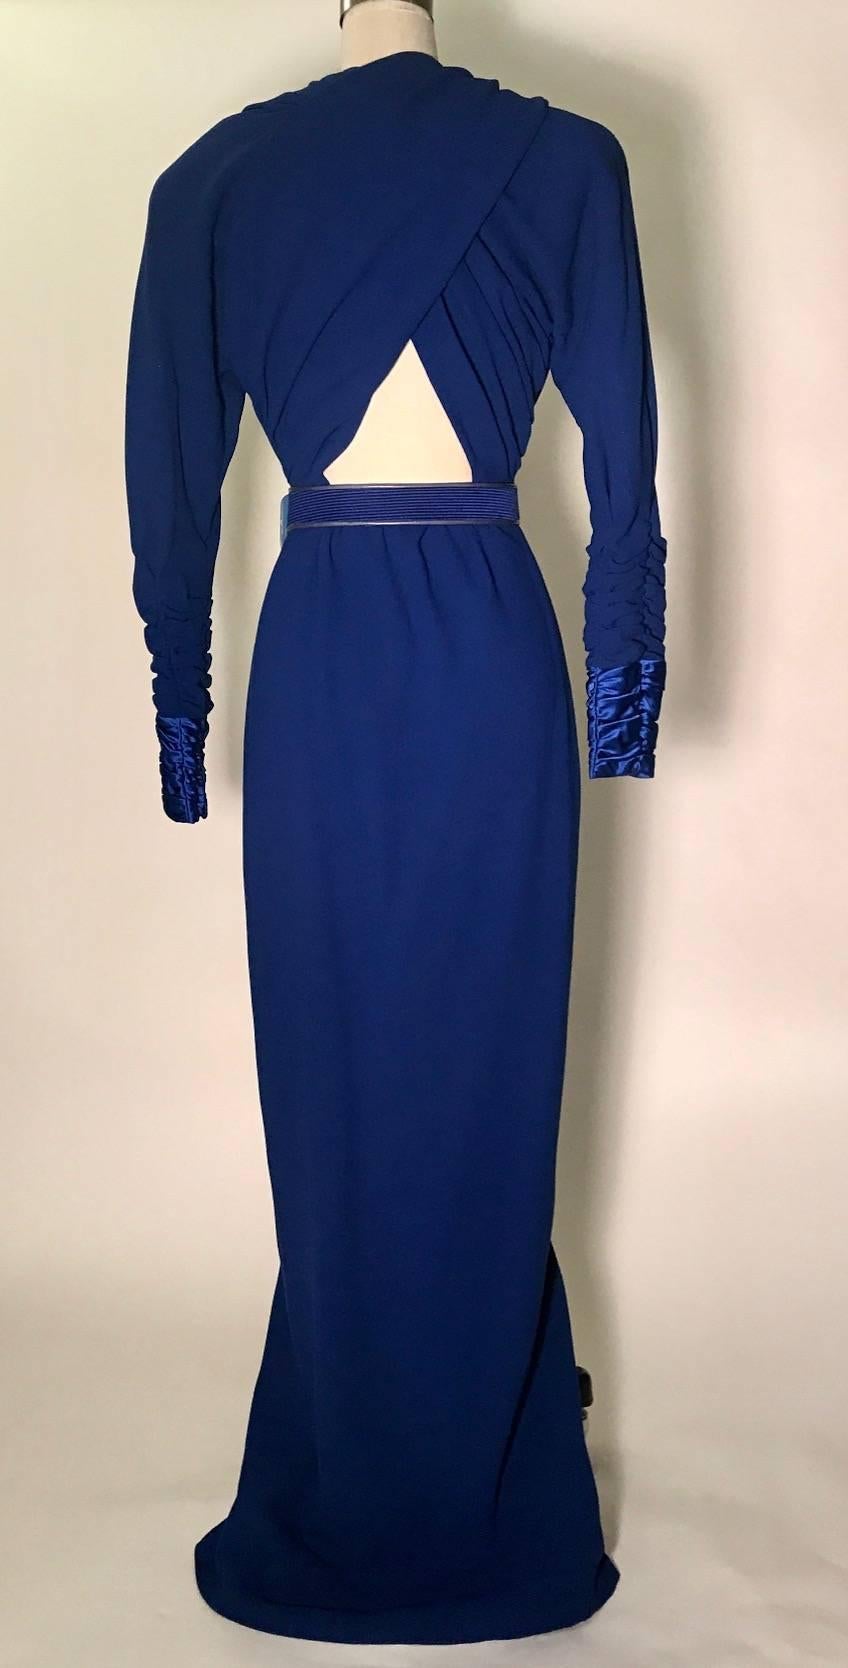 Bright blue James Galanos 1984 crepe gown from the costume collection of the Metropolitan Museum of Art. A stunning full length gown with plunging front, criss cross peekaboo back, and high center front slit. Long and full zippered sleeves are